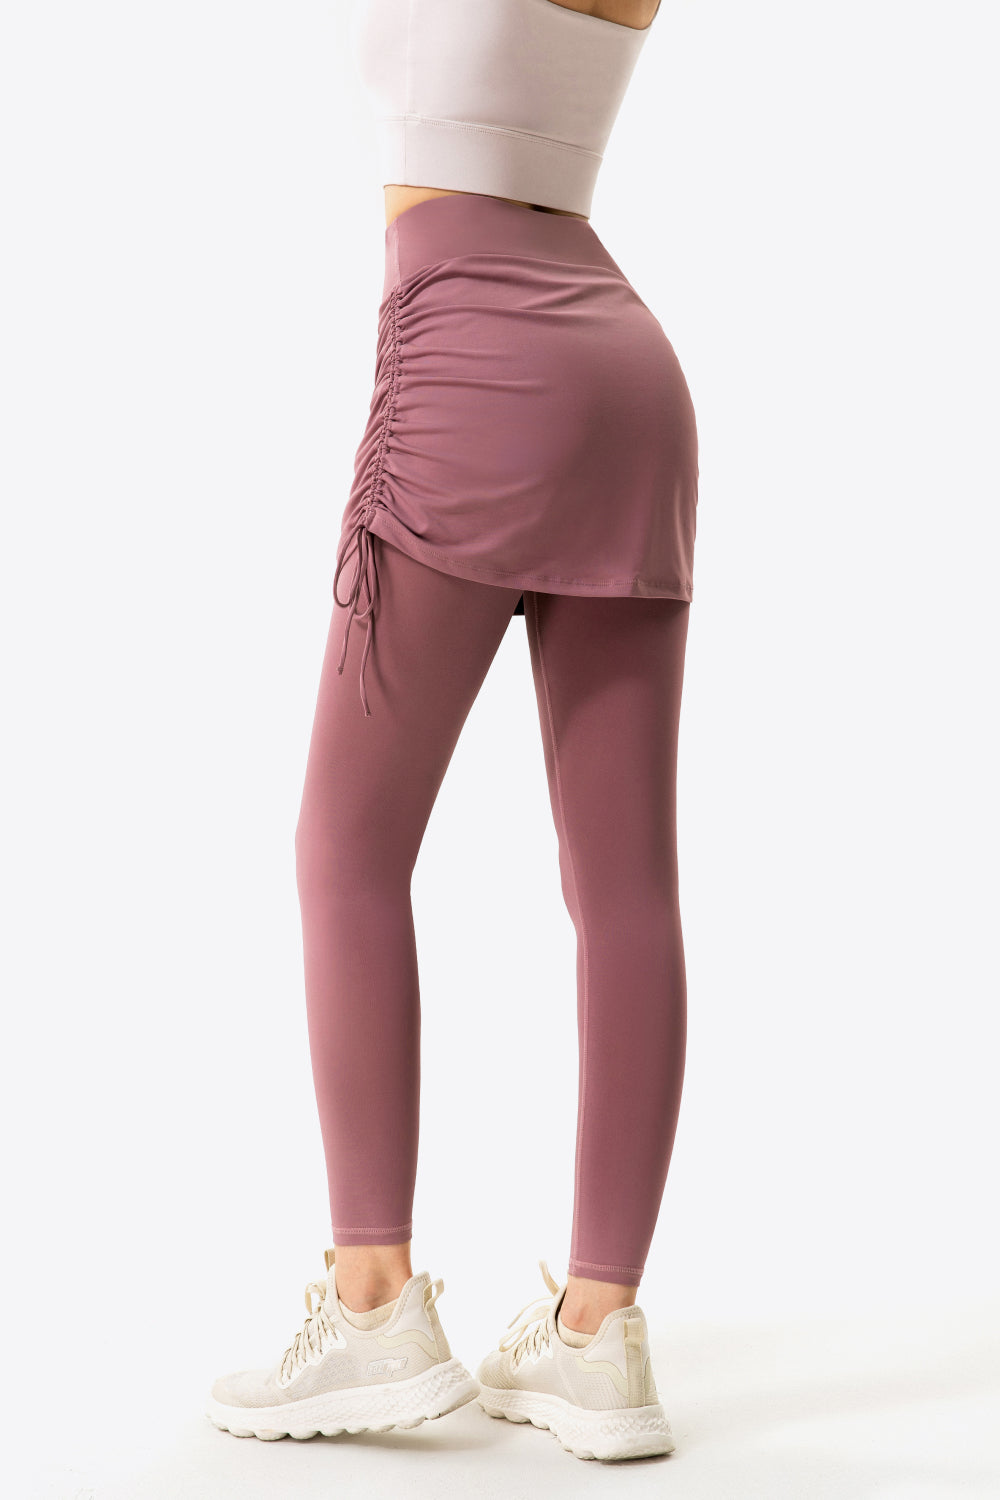 Drawstring Ruched Faux Layered Yoga Leggings - Women’s Clothing & Accessories - Pants - 4 - 2024